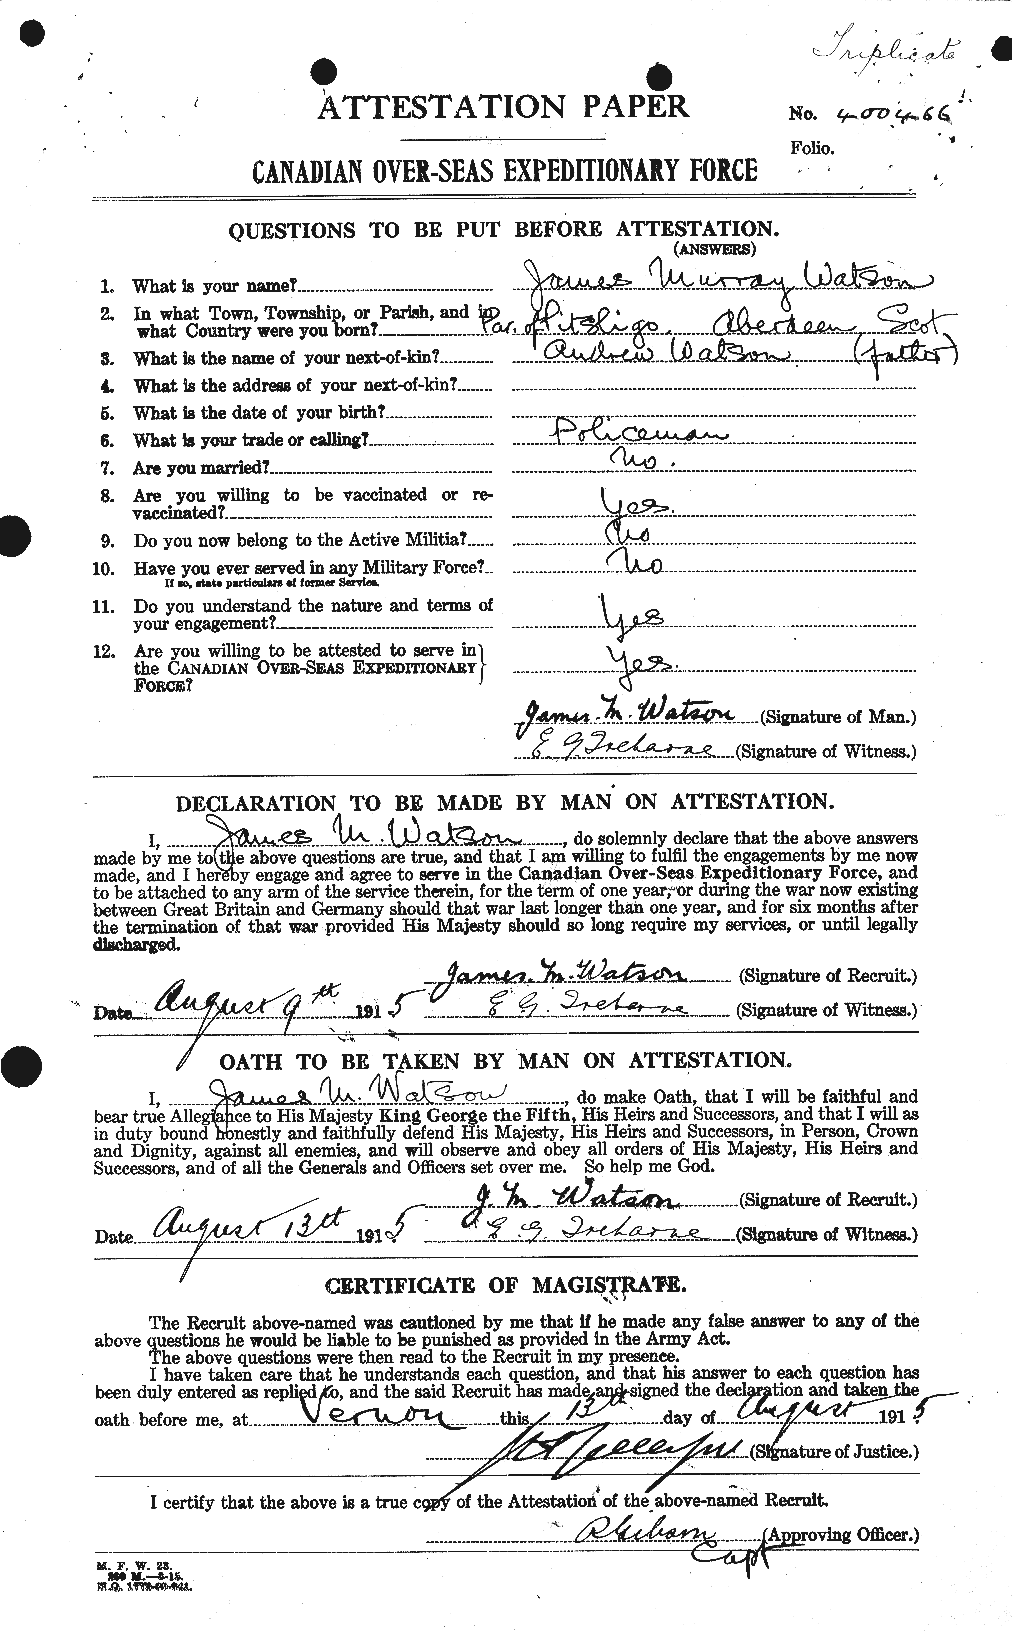 Personnel Records of the First World War - CEF 658967a